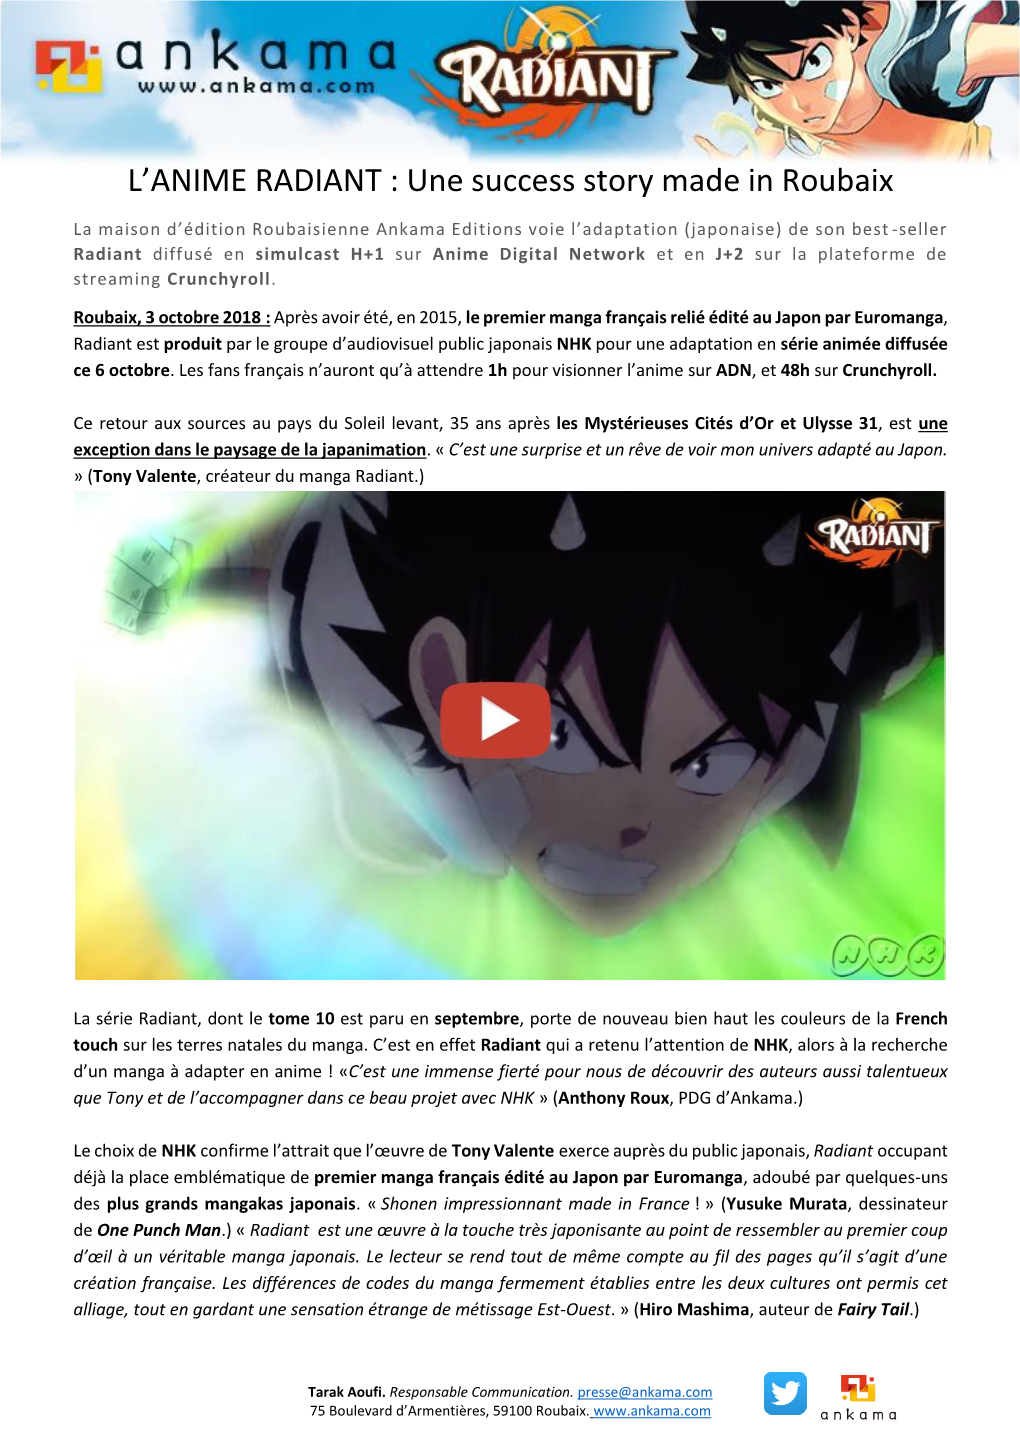 L'anime RADIANT : Une Success Story Made in Roubaix